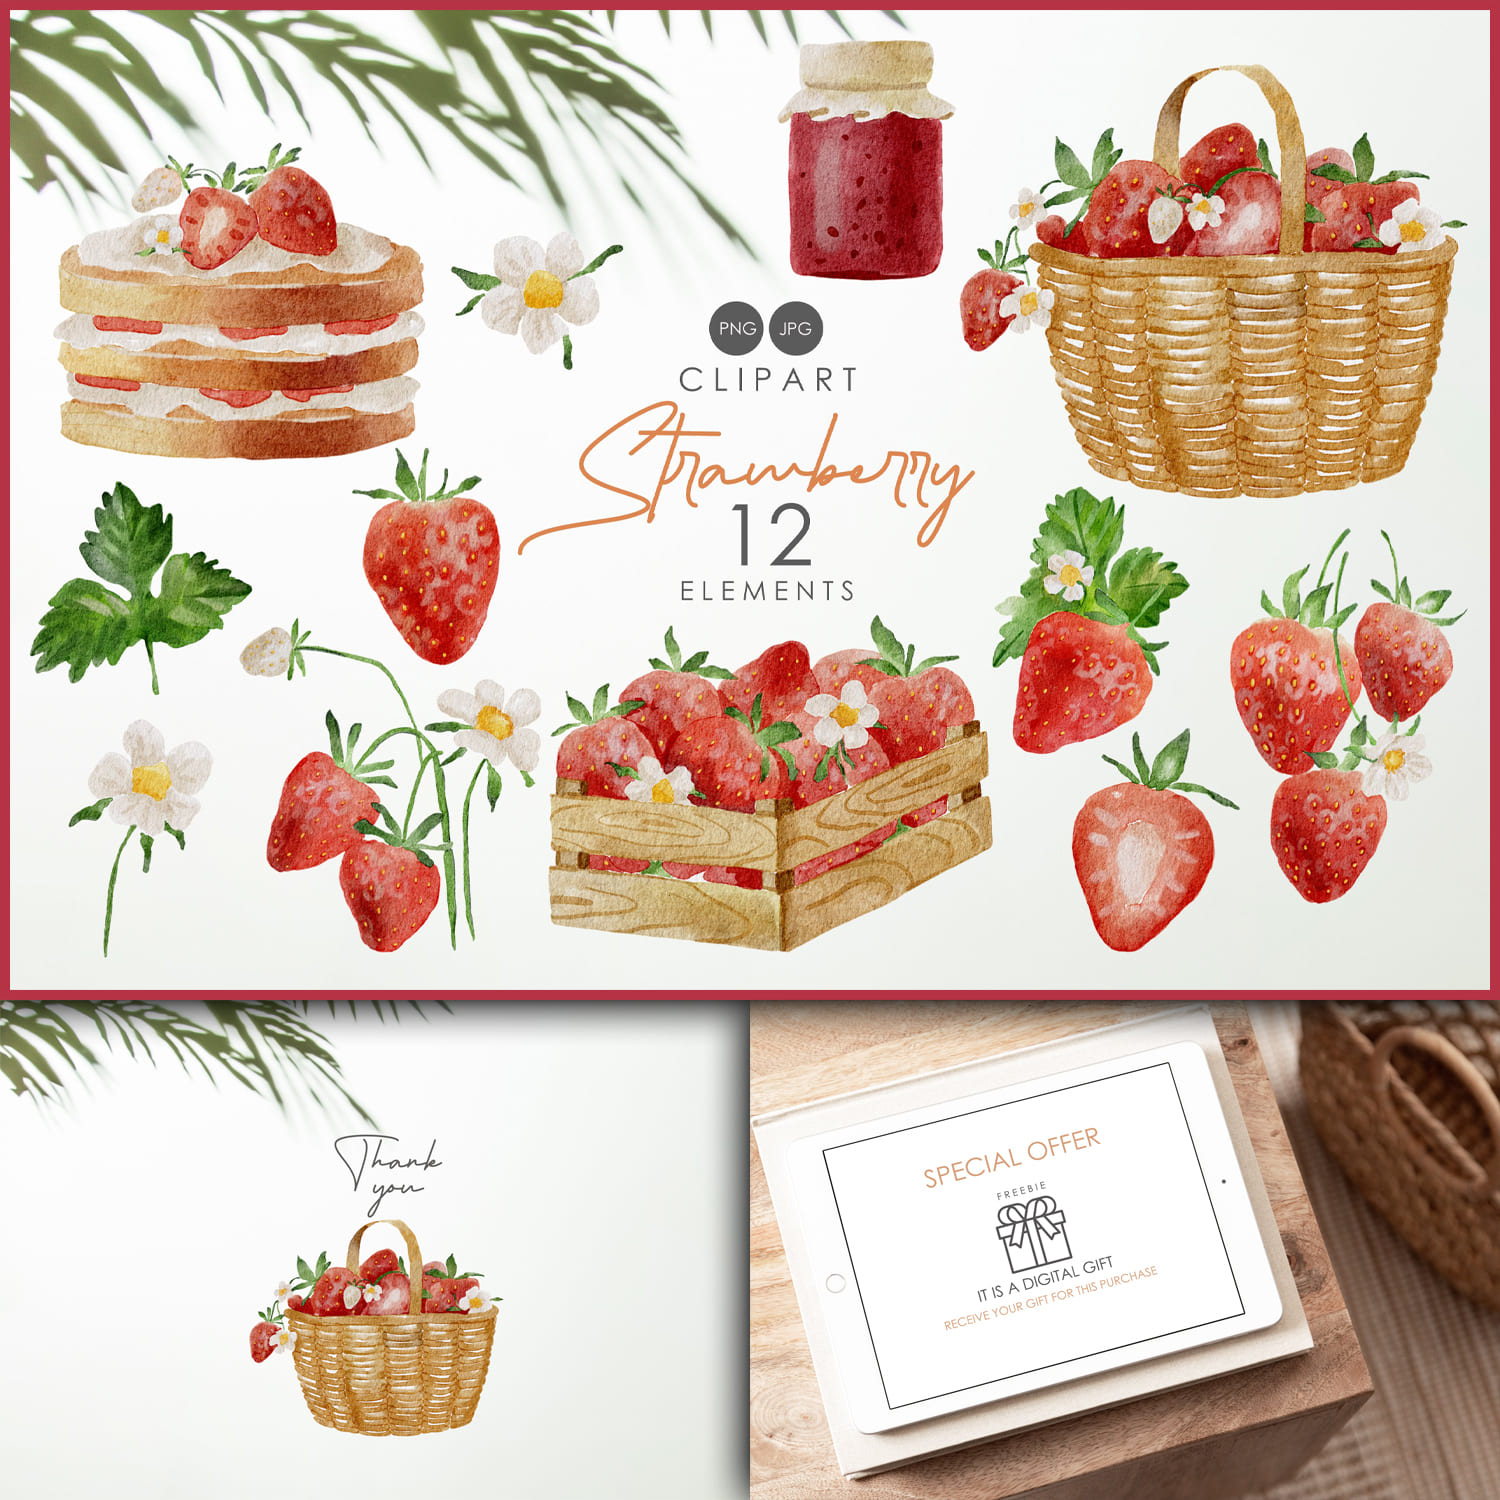 12 elements of strawberry.